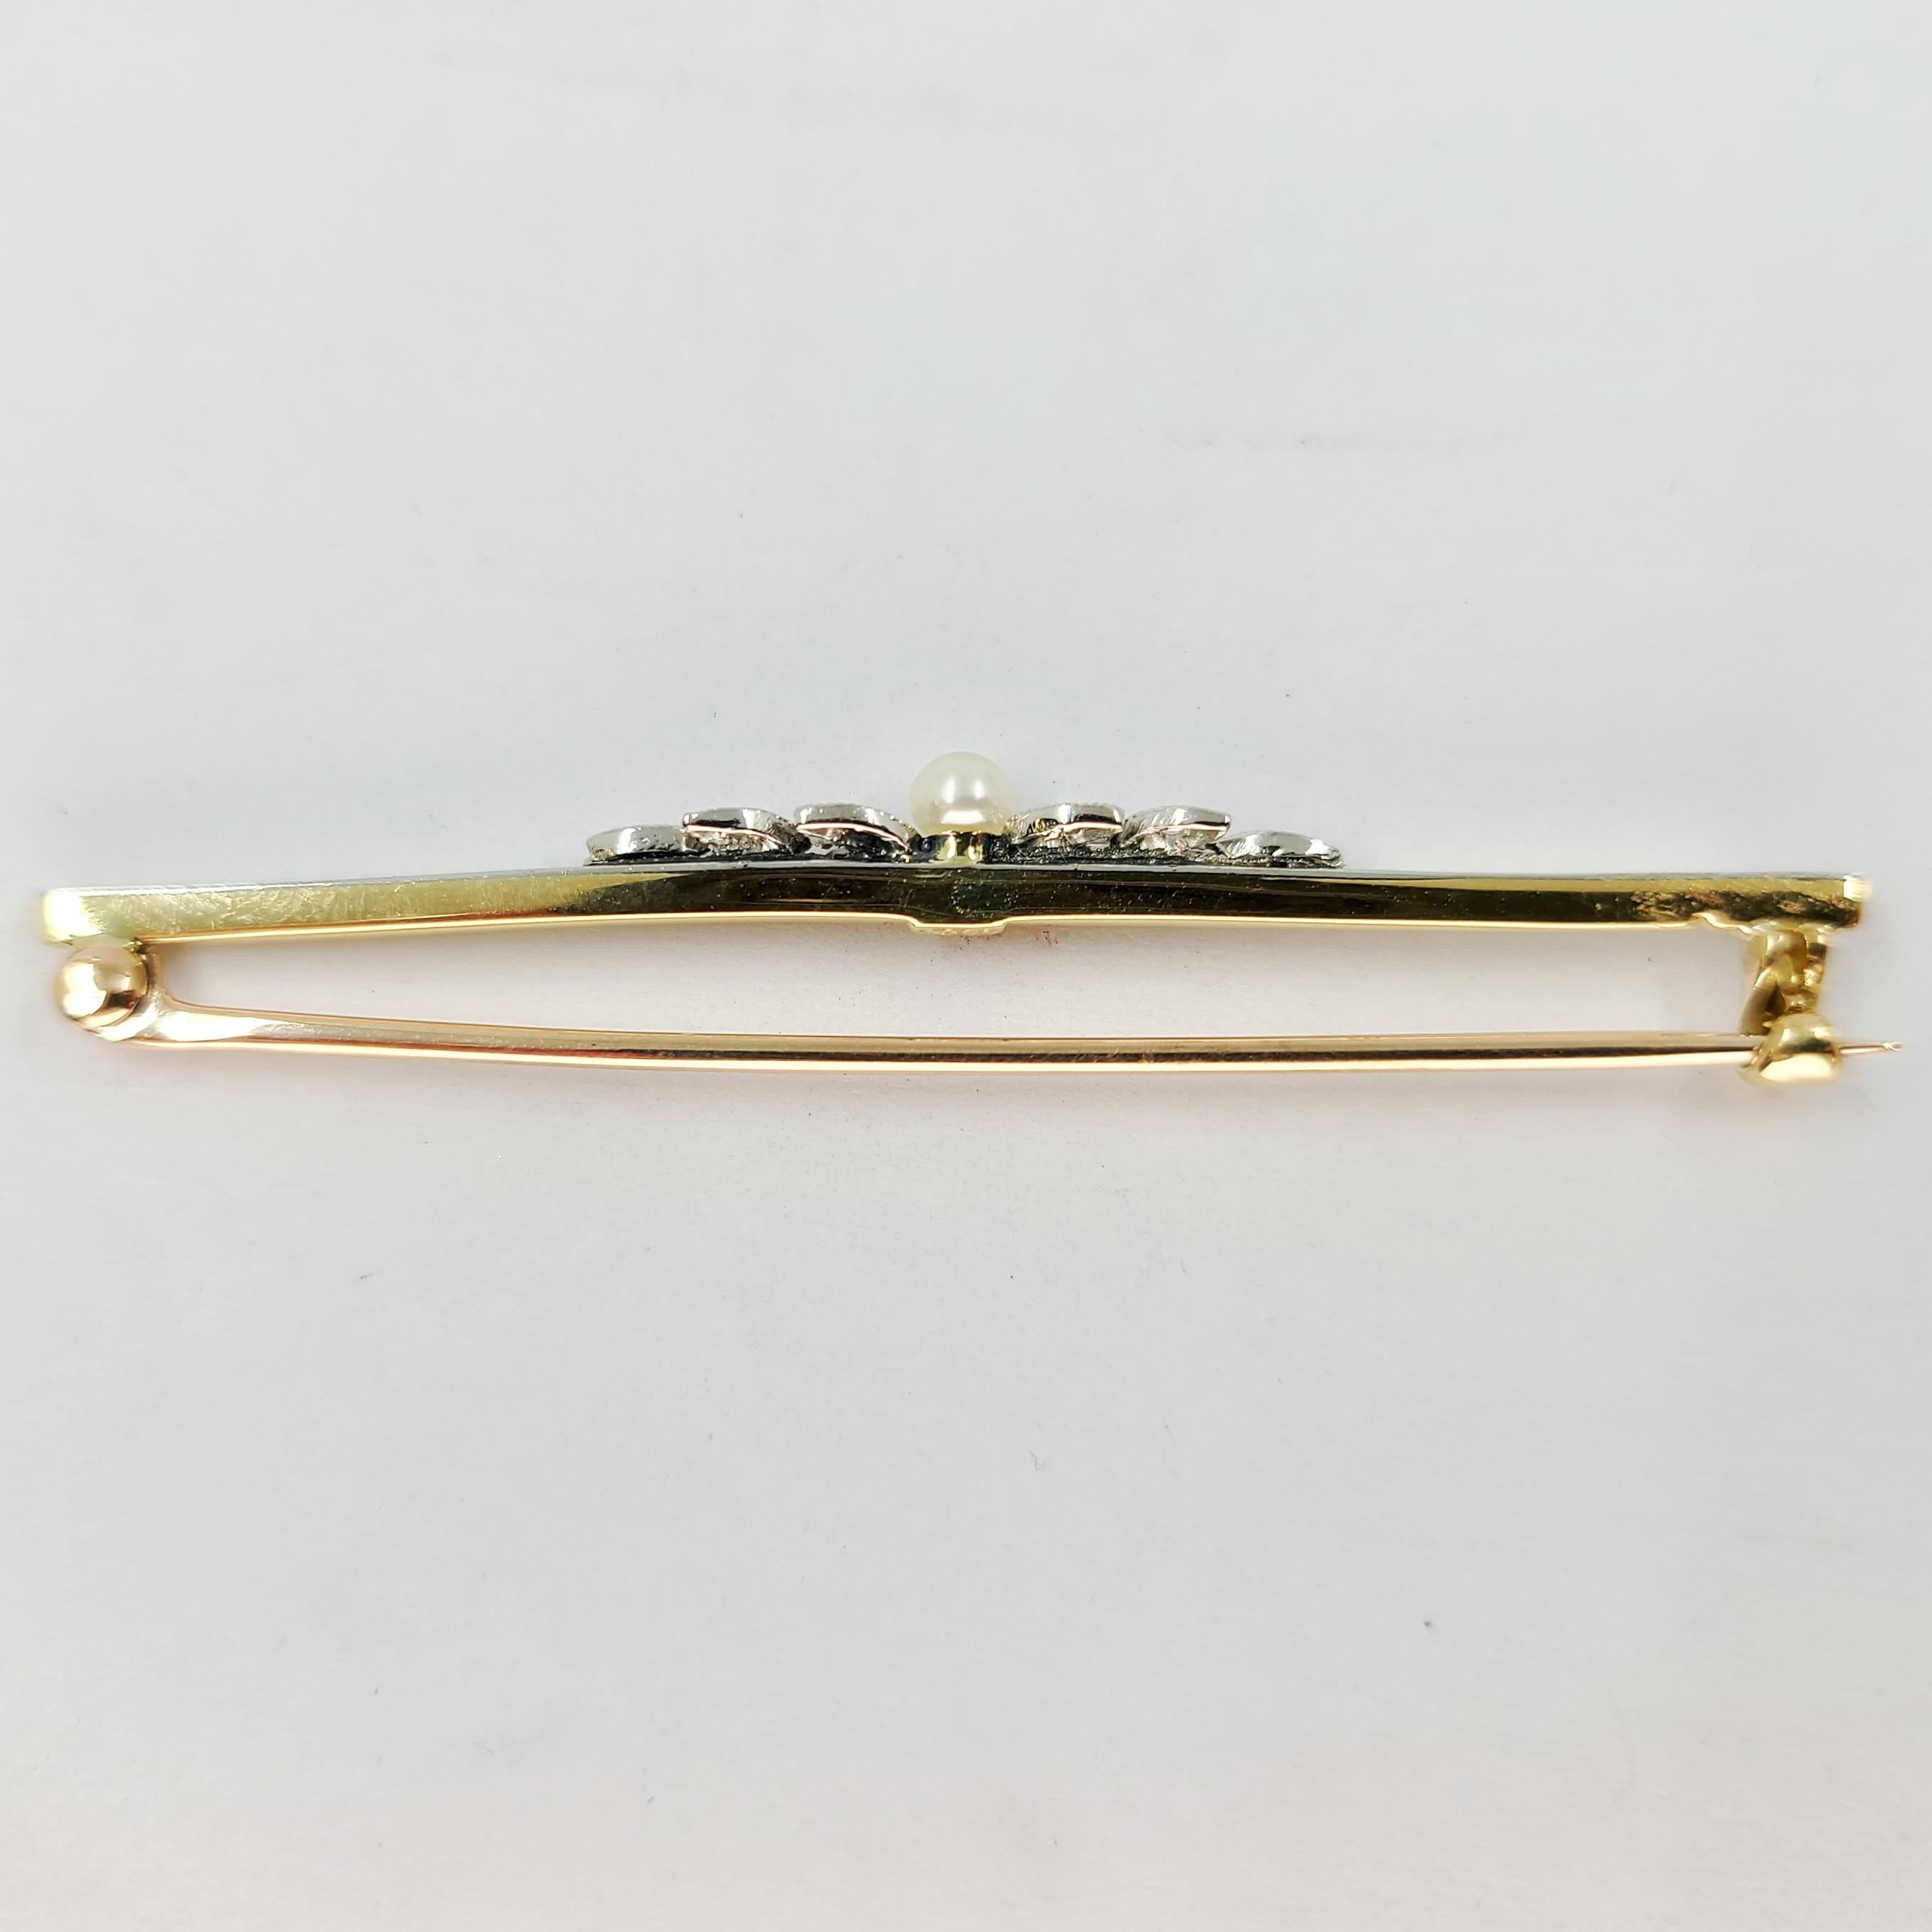 18 Karat Yellow Gold Pin Featuring 10 Diamonds Totaling Approximately 0.05ct & 1 Small Pearl (Assumed Cultured). 2 Inches Long. Finished Weight is 3.5 Grams.